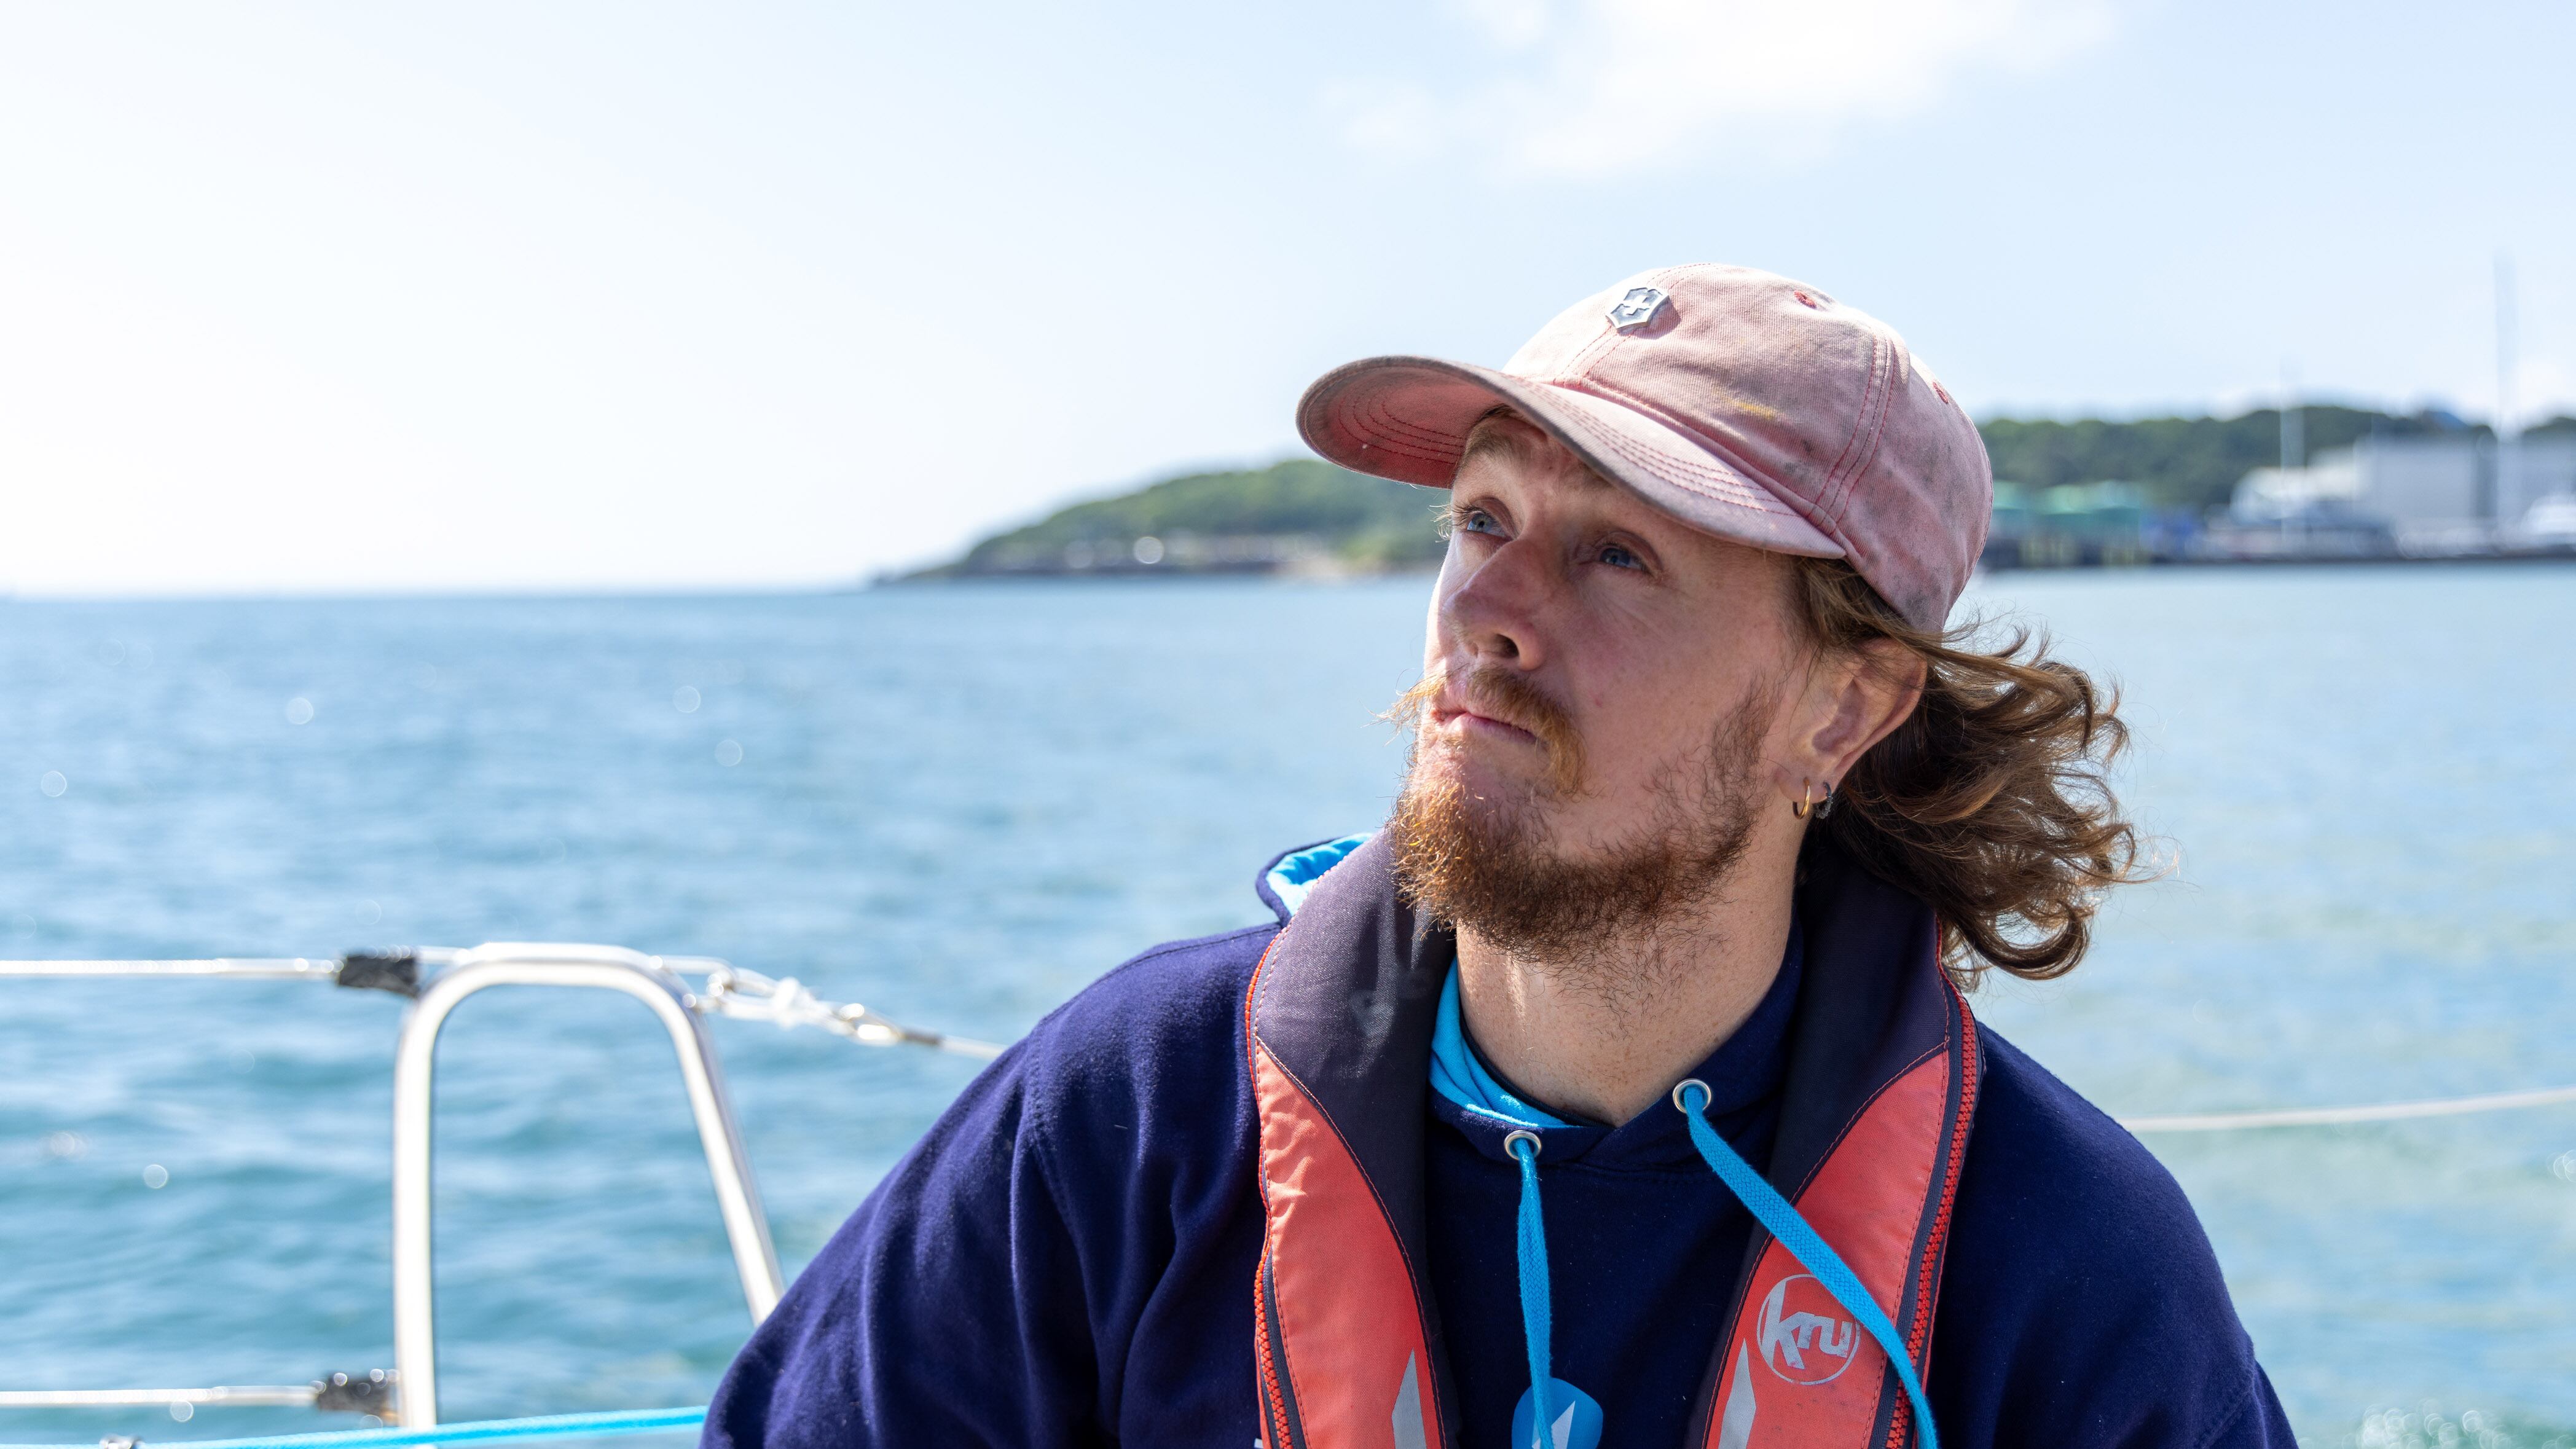 Craig Wood is aiming to be the first triple amputee to sail across the Pacific Ocean non-stop, solo and unsupported